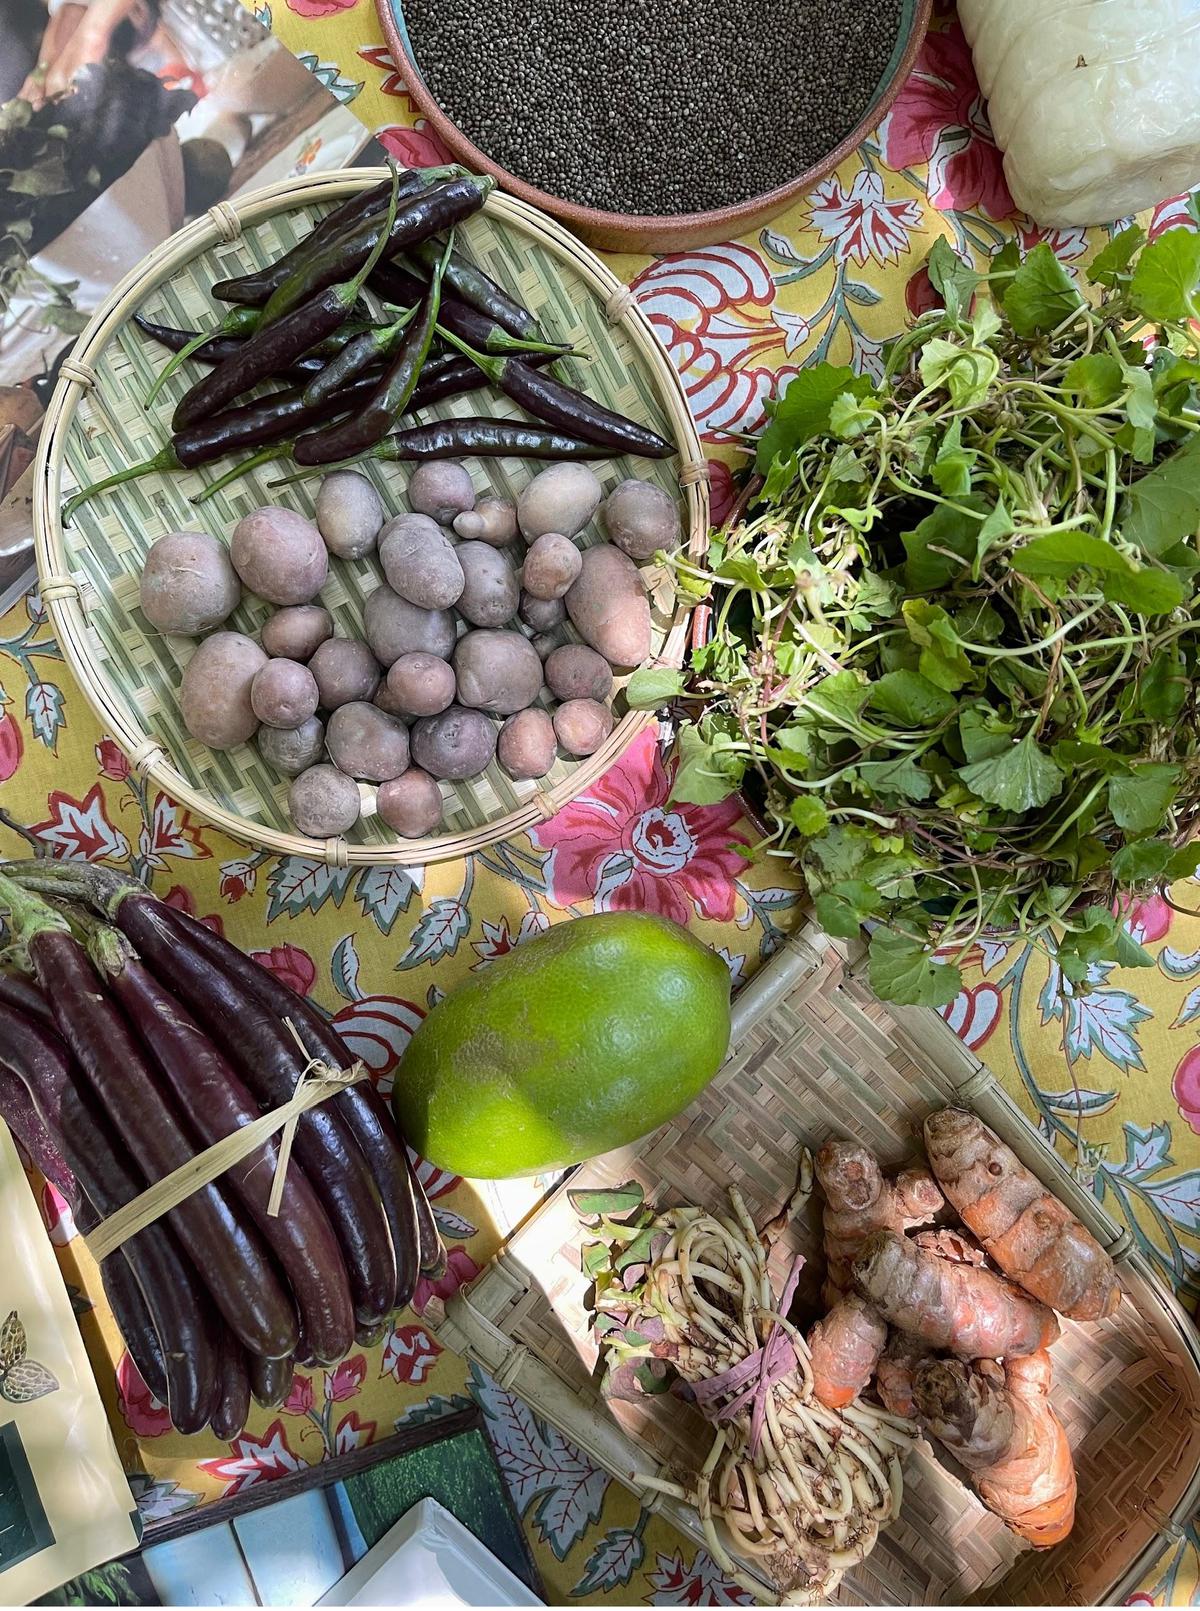 Some of what I brought back: the sweetest red potatoes, purple chillies, local varieties of brinjal, local lemon, fish mint roots, fresh Lakadong turmeric and Indian pennywort, which is eaten raw as a salad.